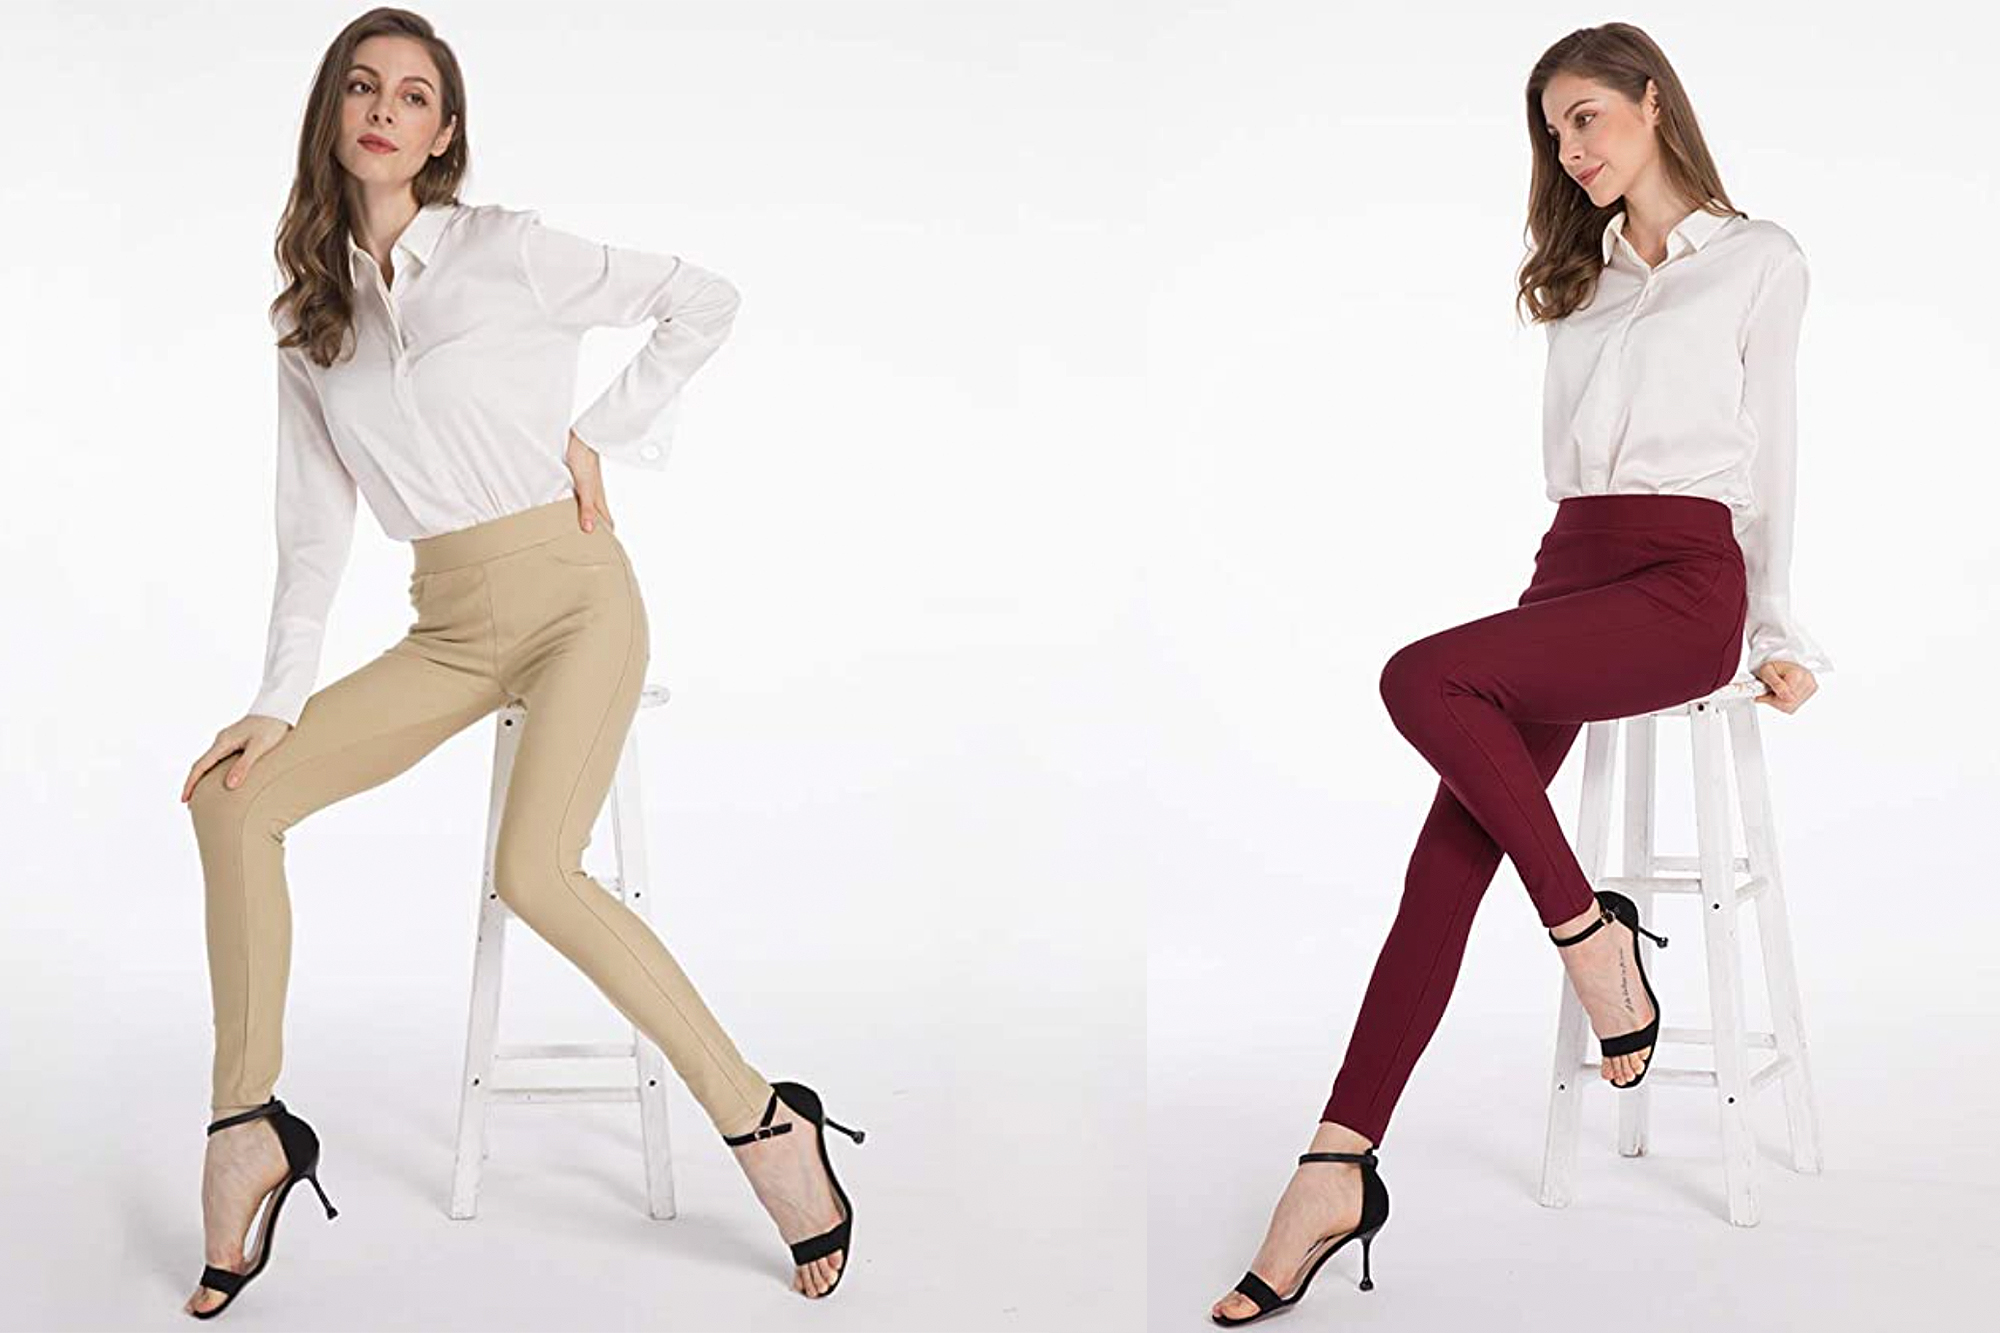 Ginasy Dress Pants for Women Business Casual Stretch Palestine